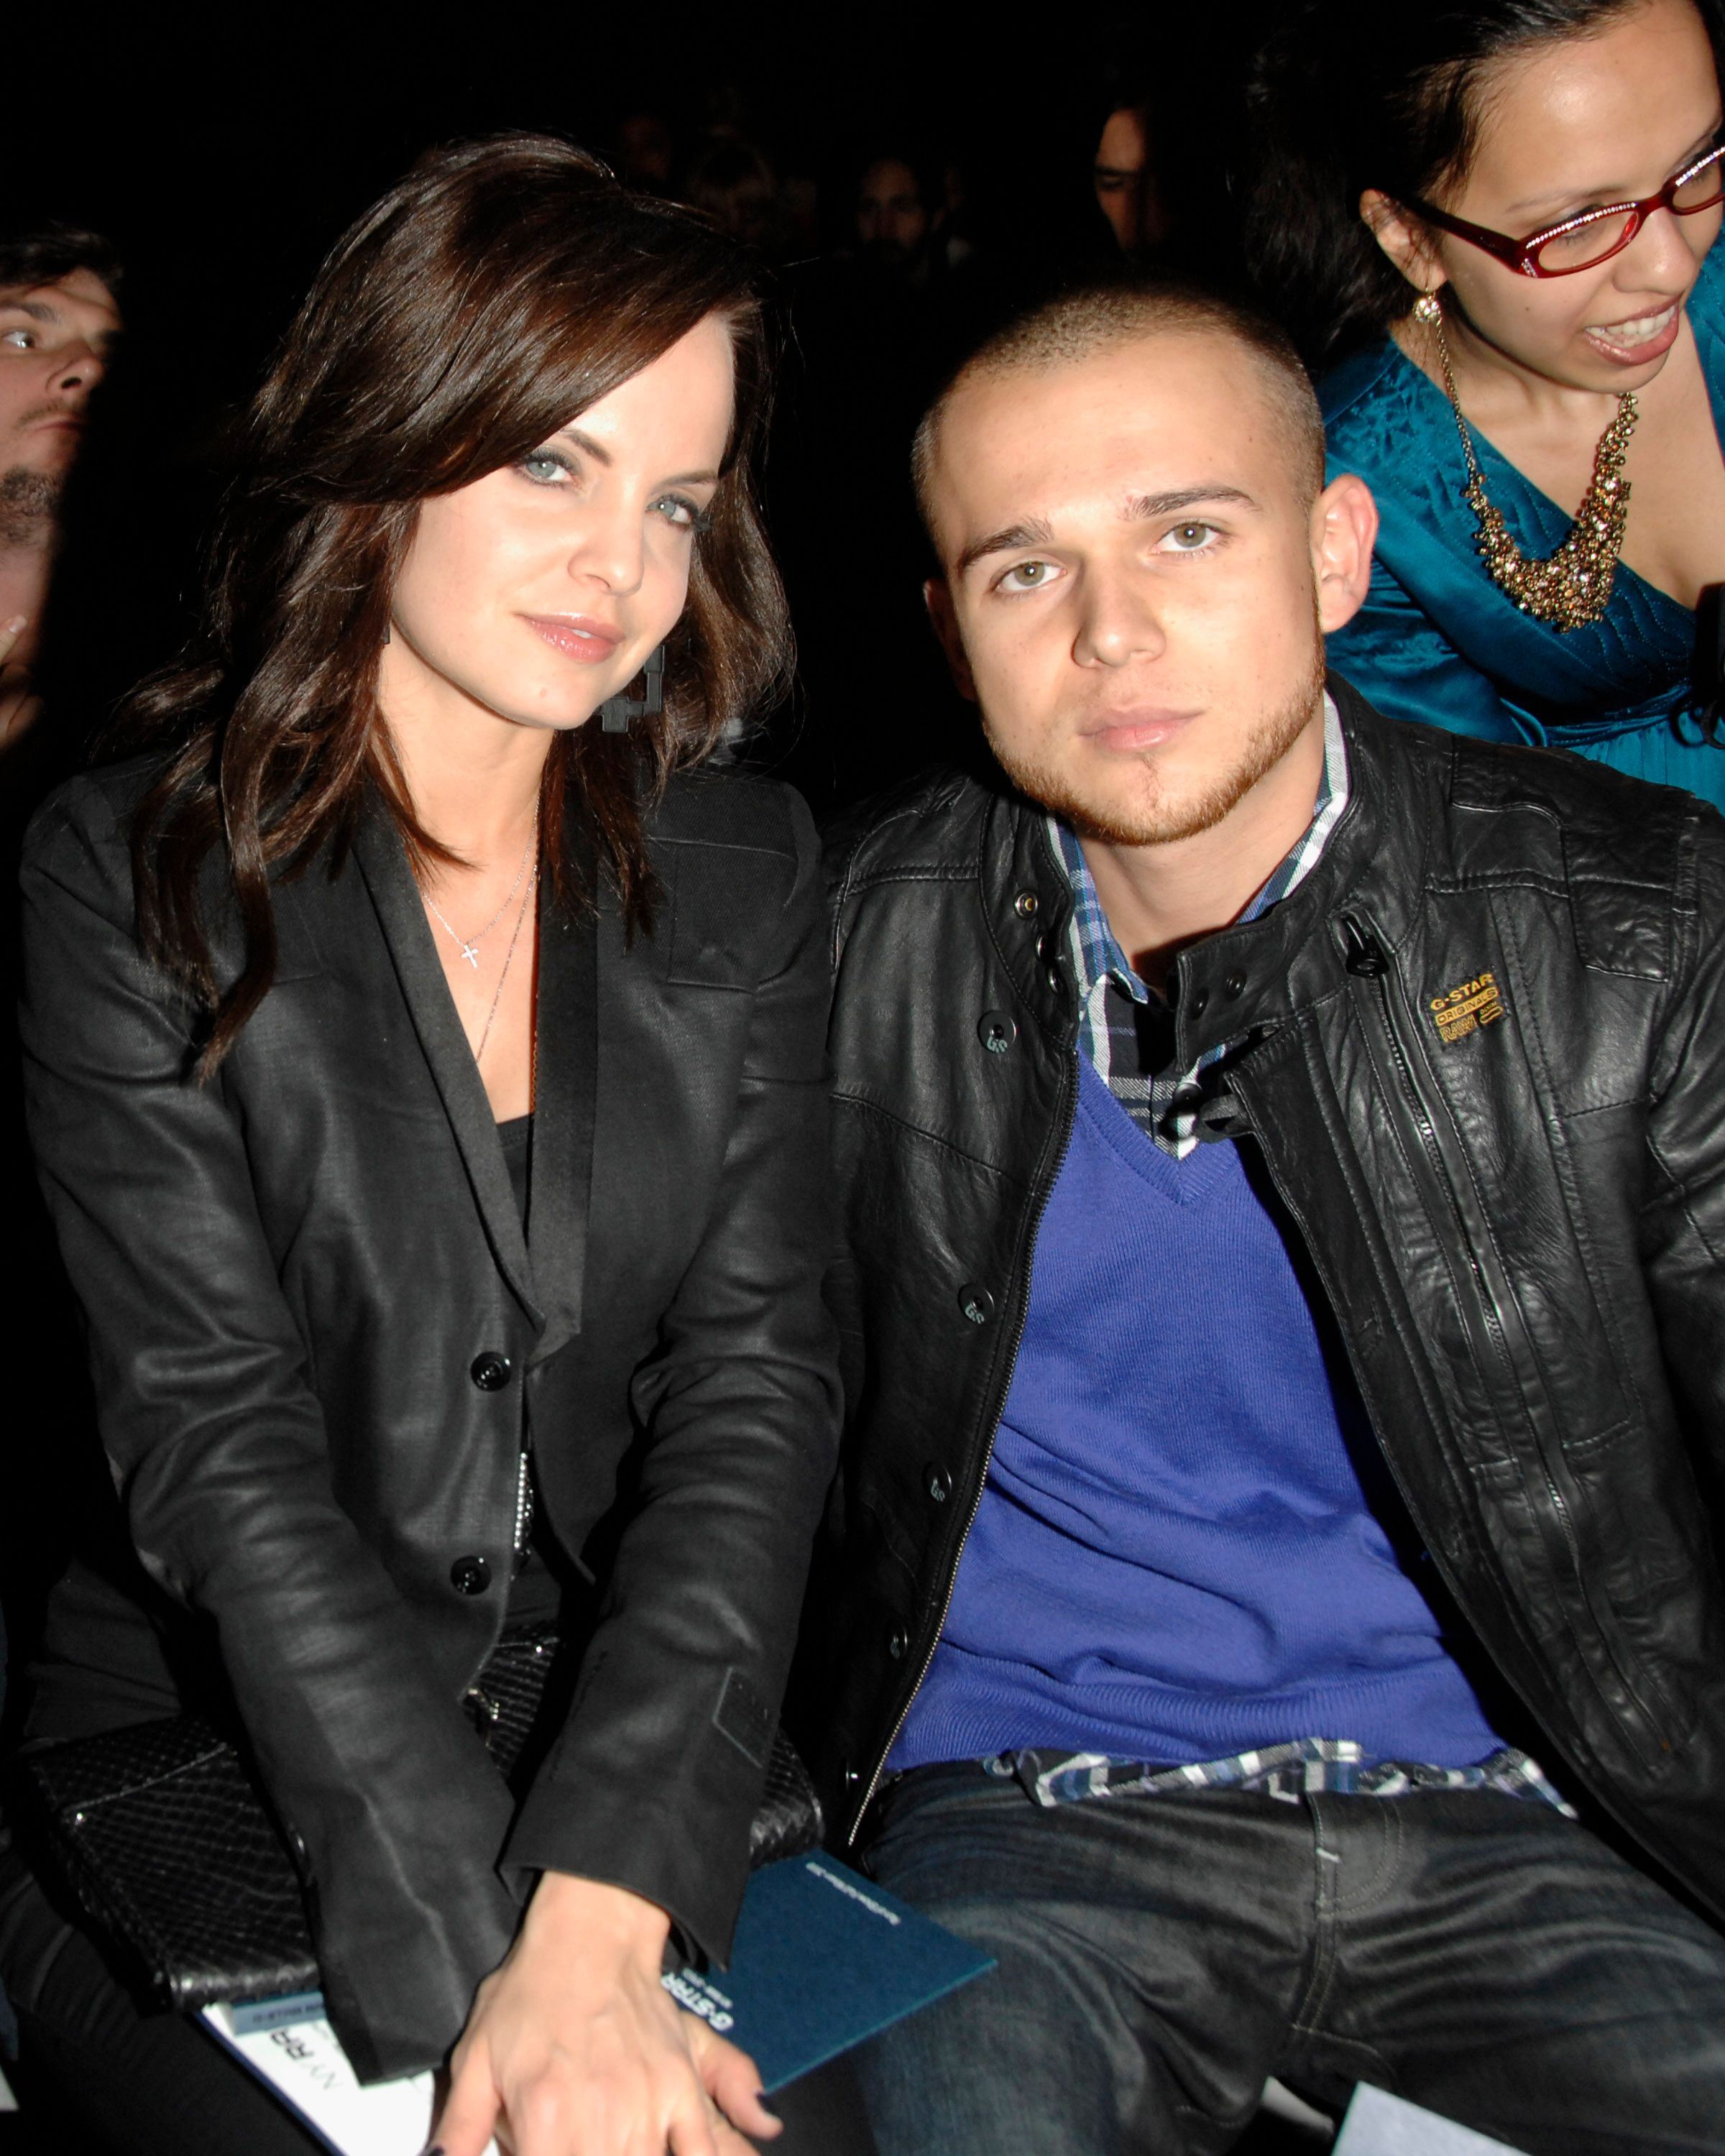  Mena Suvari and Simone Sestito at the NY RAW Fall/Winter 2010 Collection in 2010 in New York City | Source: Getty Images